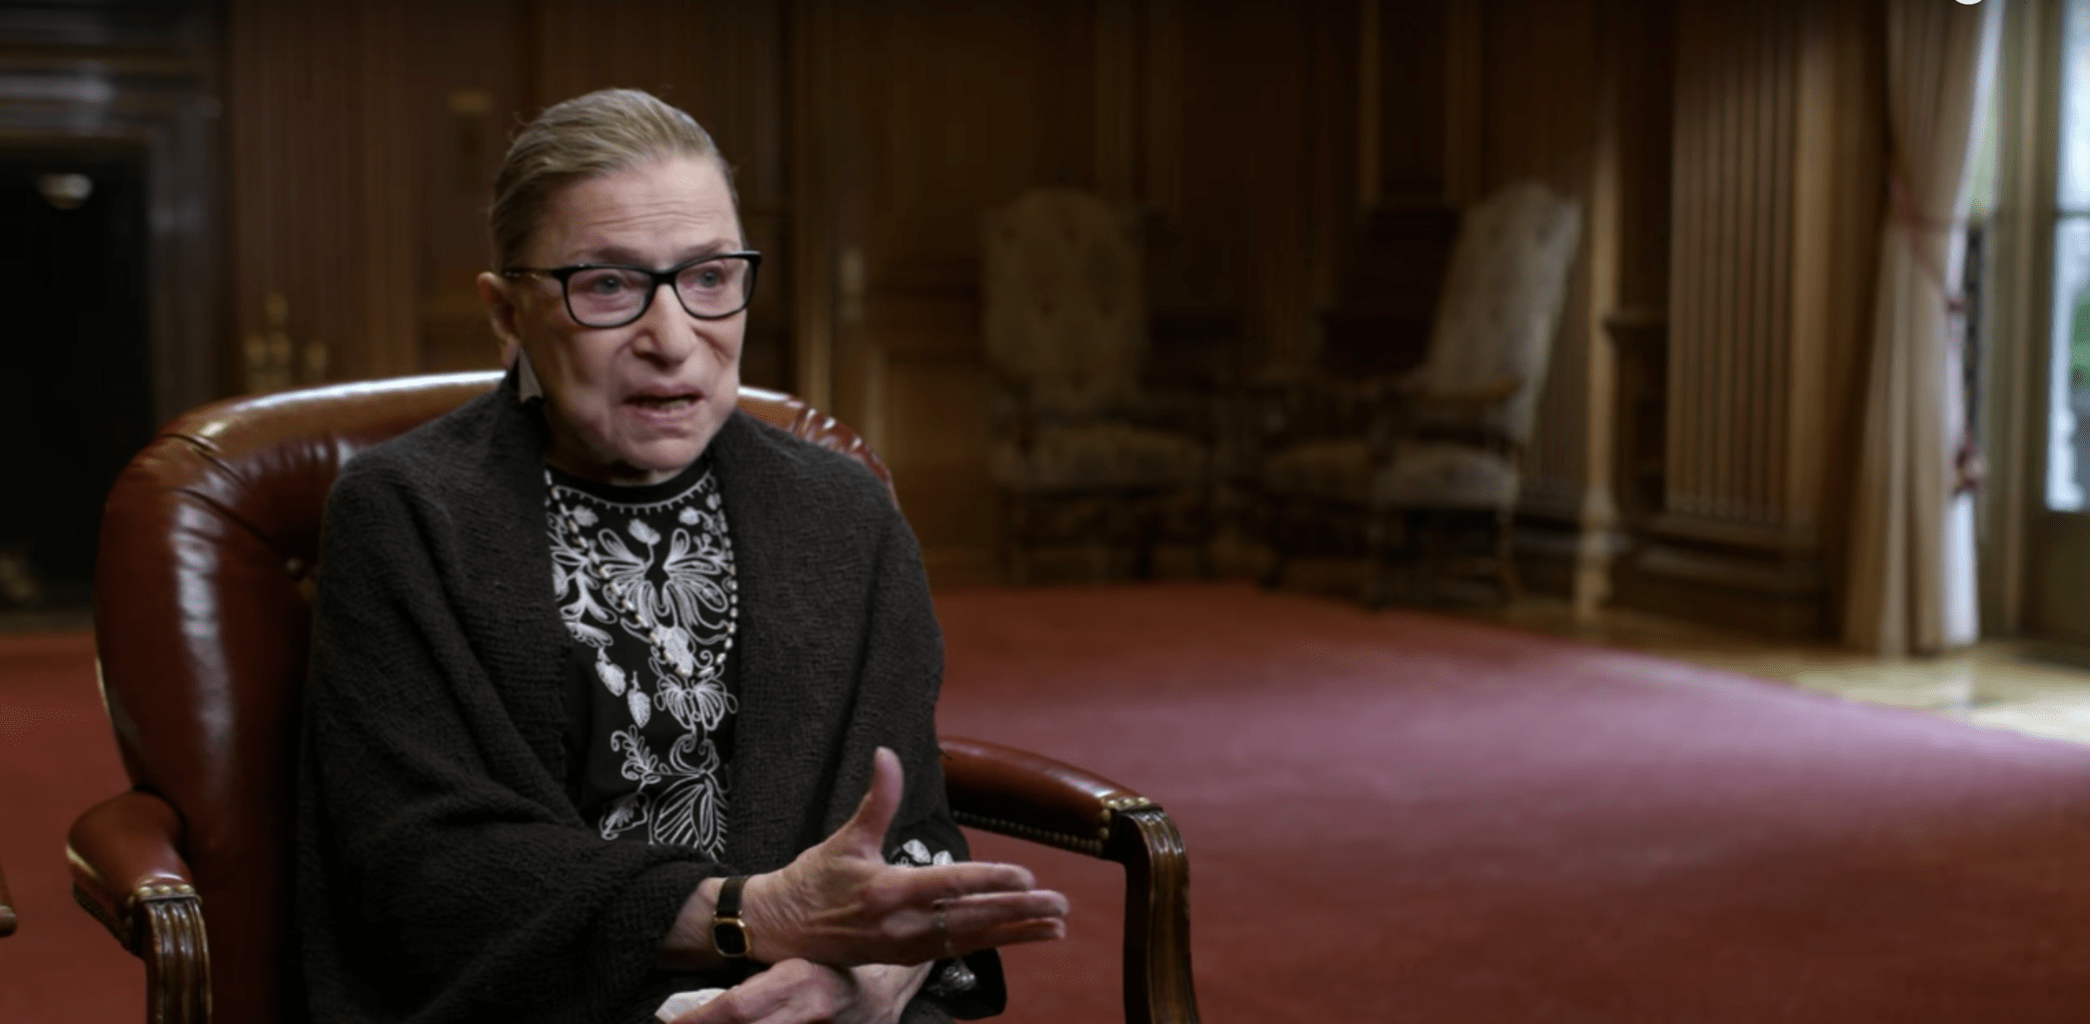 Watch The Trailer For The Ruth Bader Ginsburg Documentary Rbg Relevant